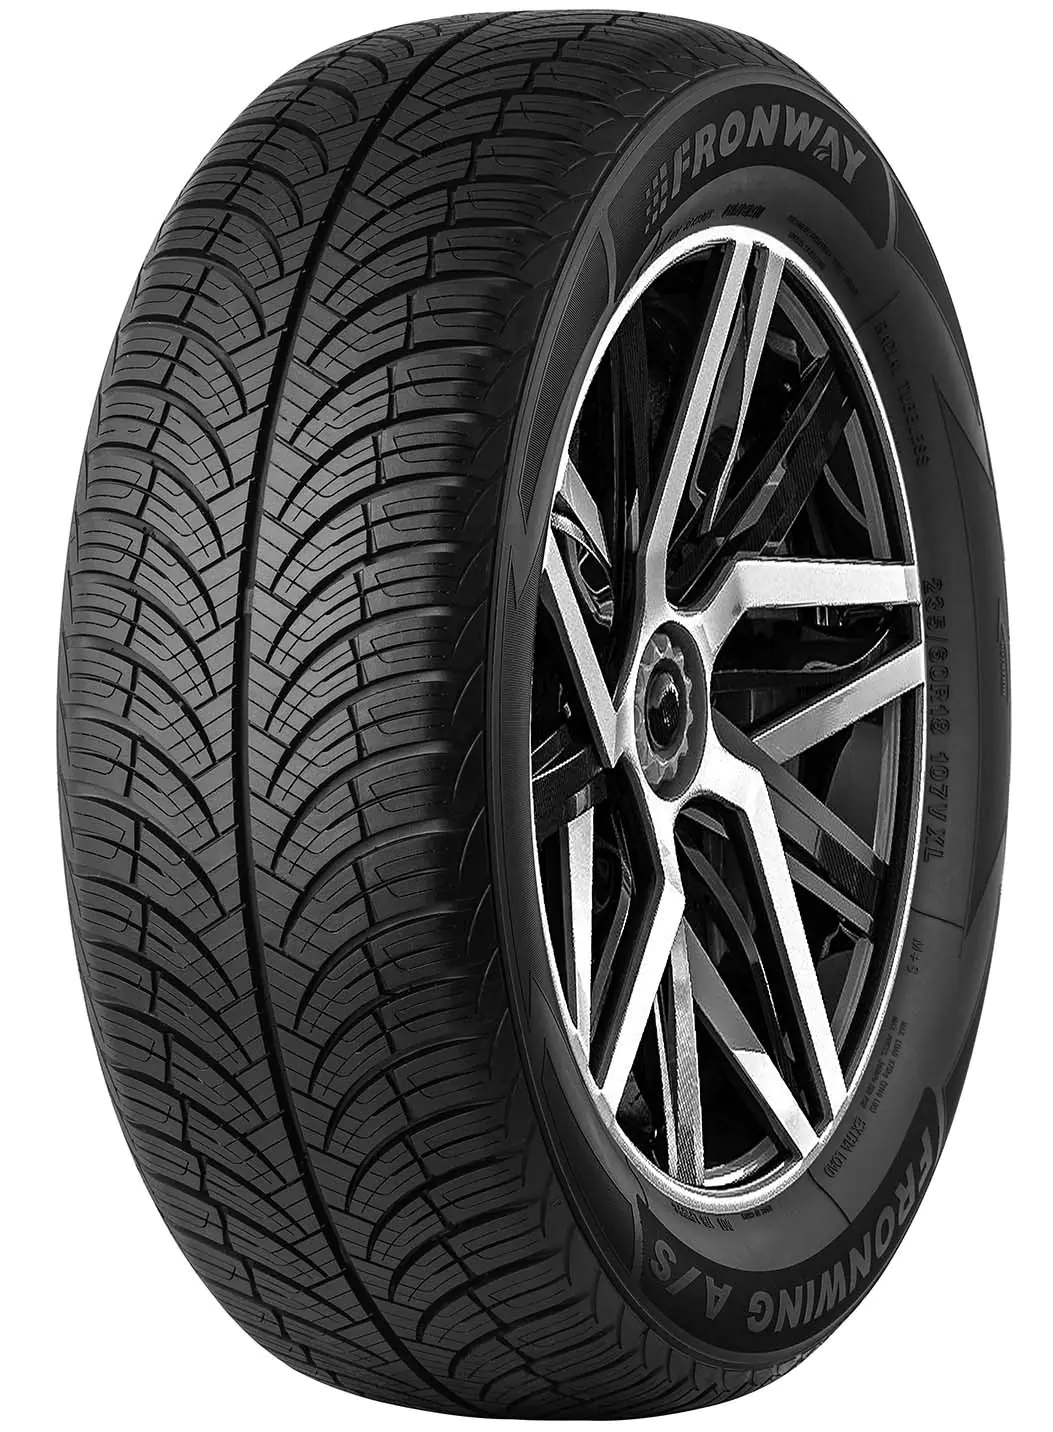 Gomme Autovettura Fronway 175/55 R15 77H FRONWING A/S M+S All Season